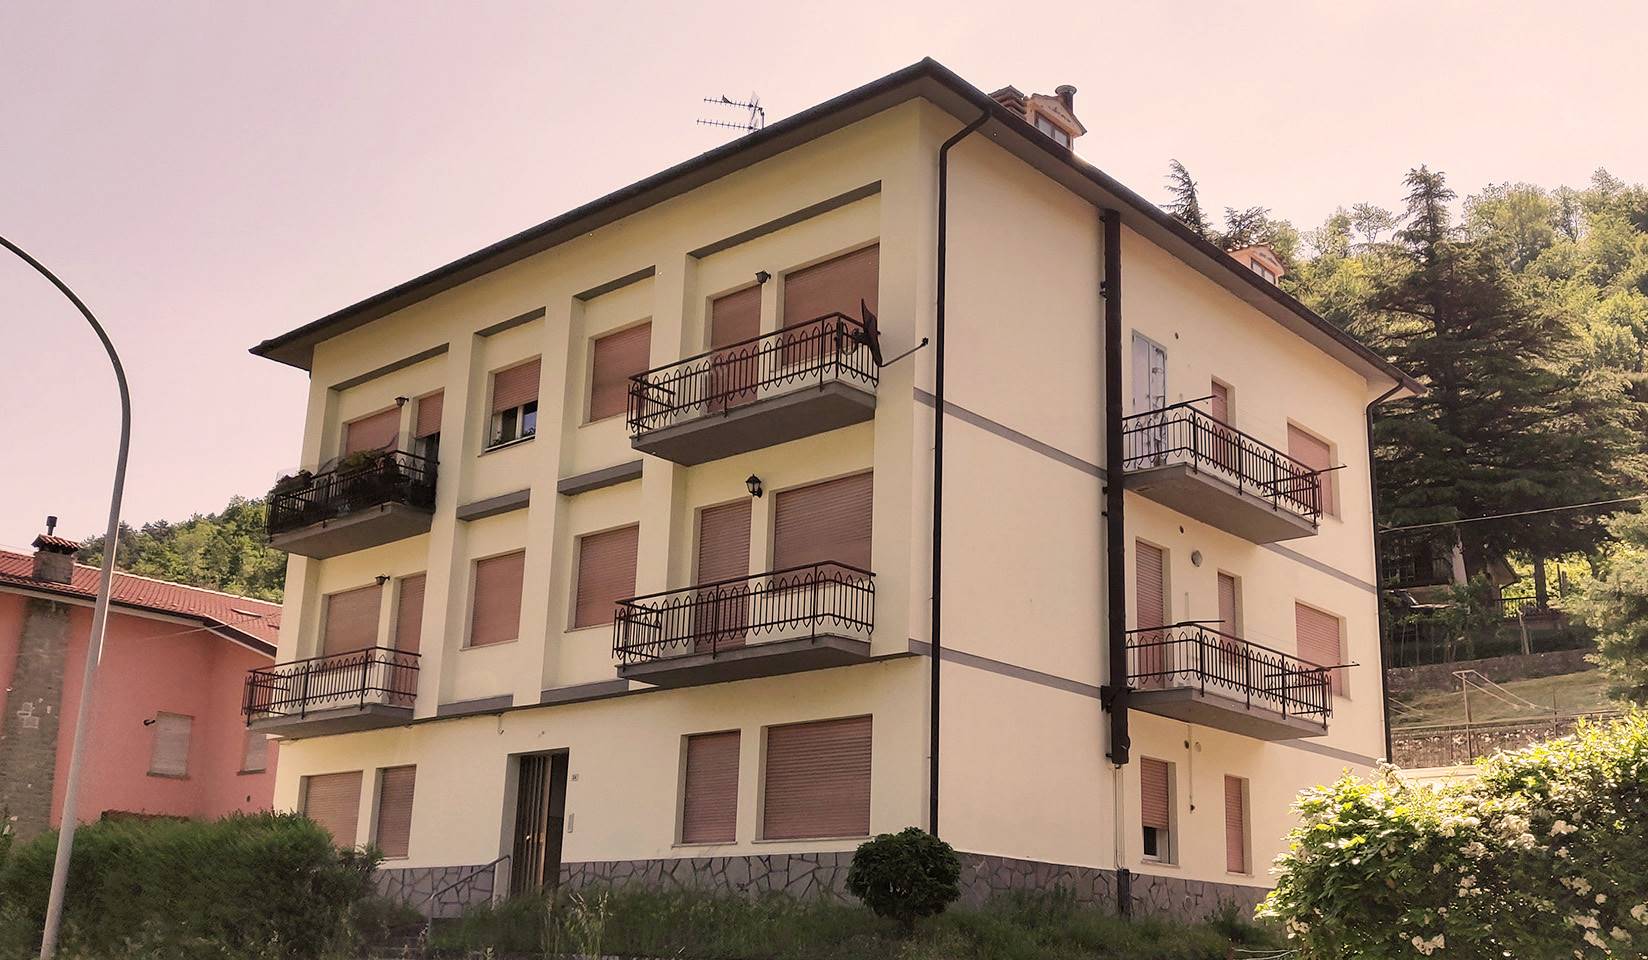 BIFORCO, MARRADI, Apartment for sale of 95 Sq. mt., Quite good conditions, Heating Individual heating system, Energetic class: G, Epi: 236,55 kwh/m2 